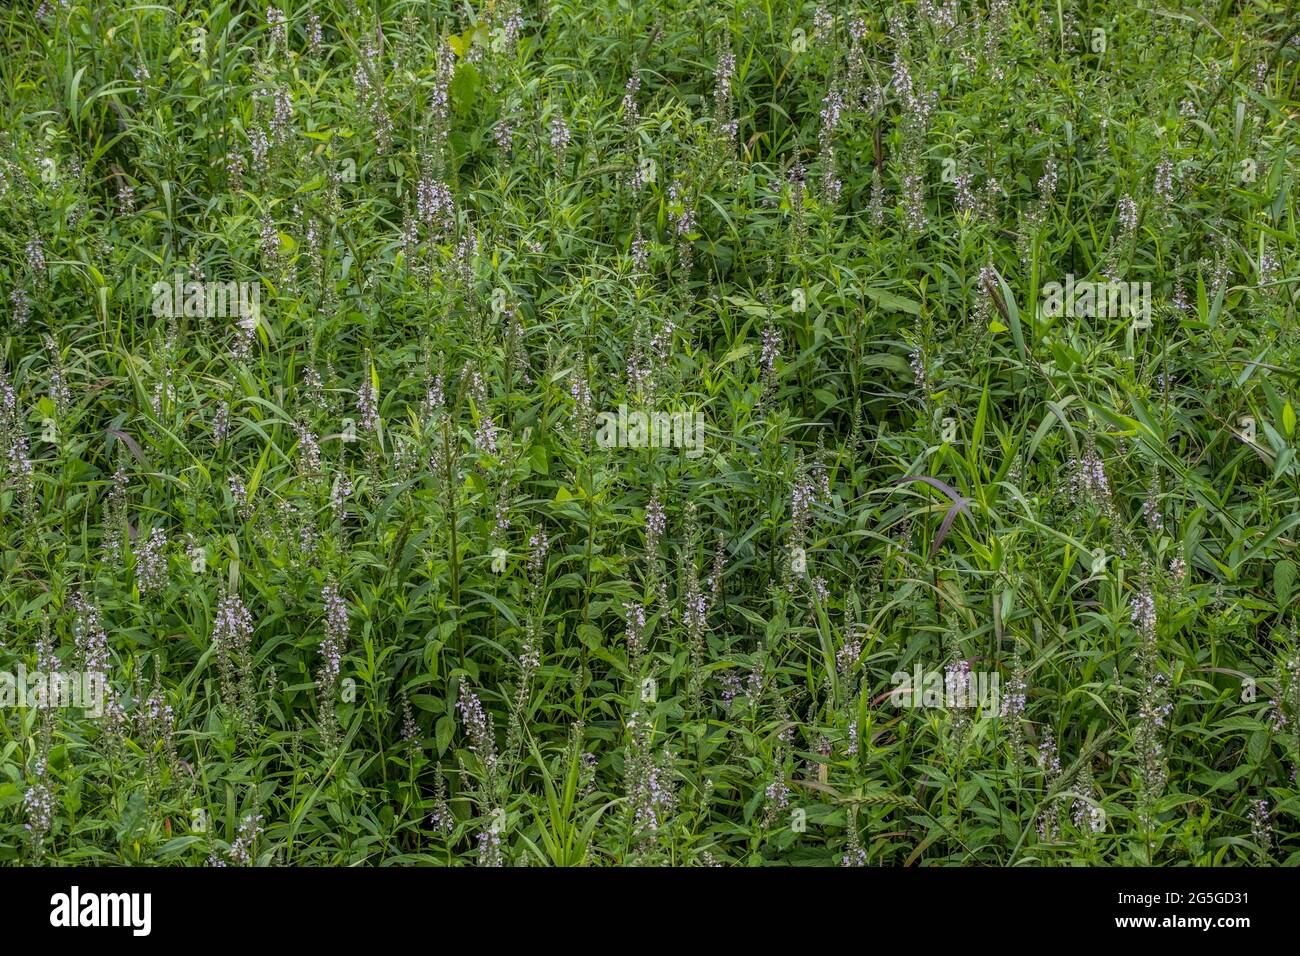 American germander also know as wood sage growing wild in a open field in the woodlands with little white to purple color flowers on the tall spiky pl Stock Photo